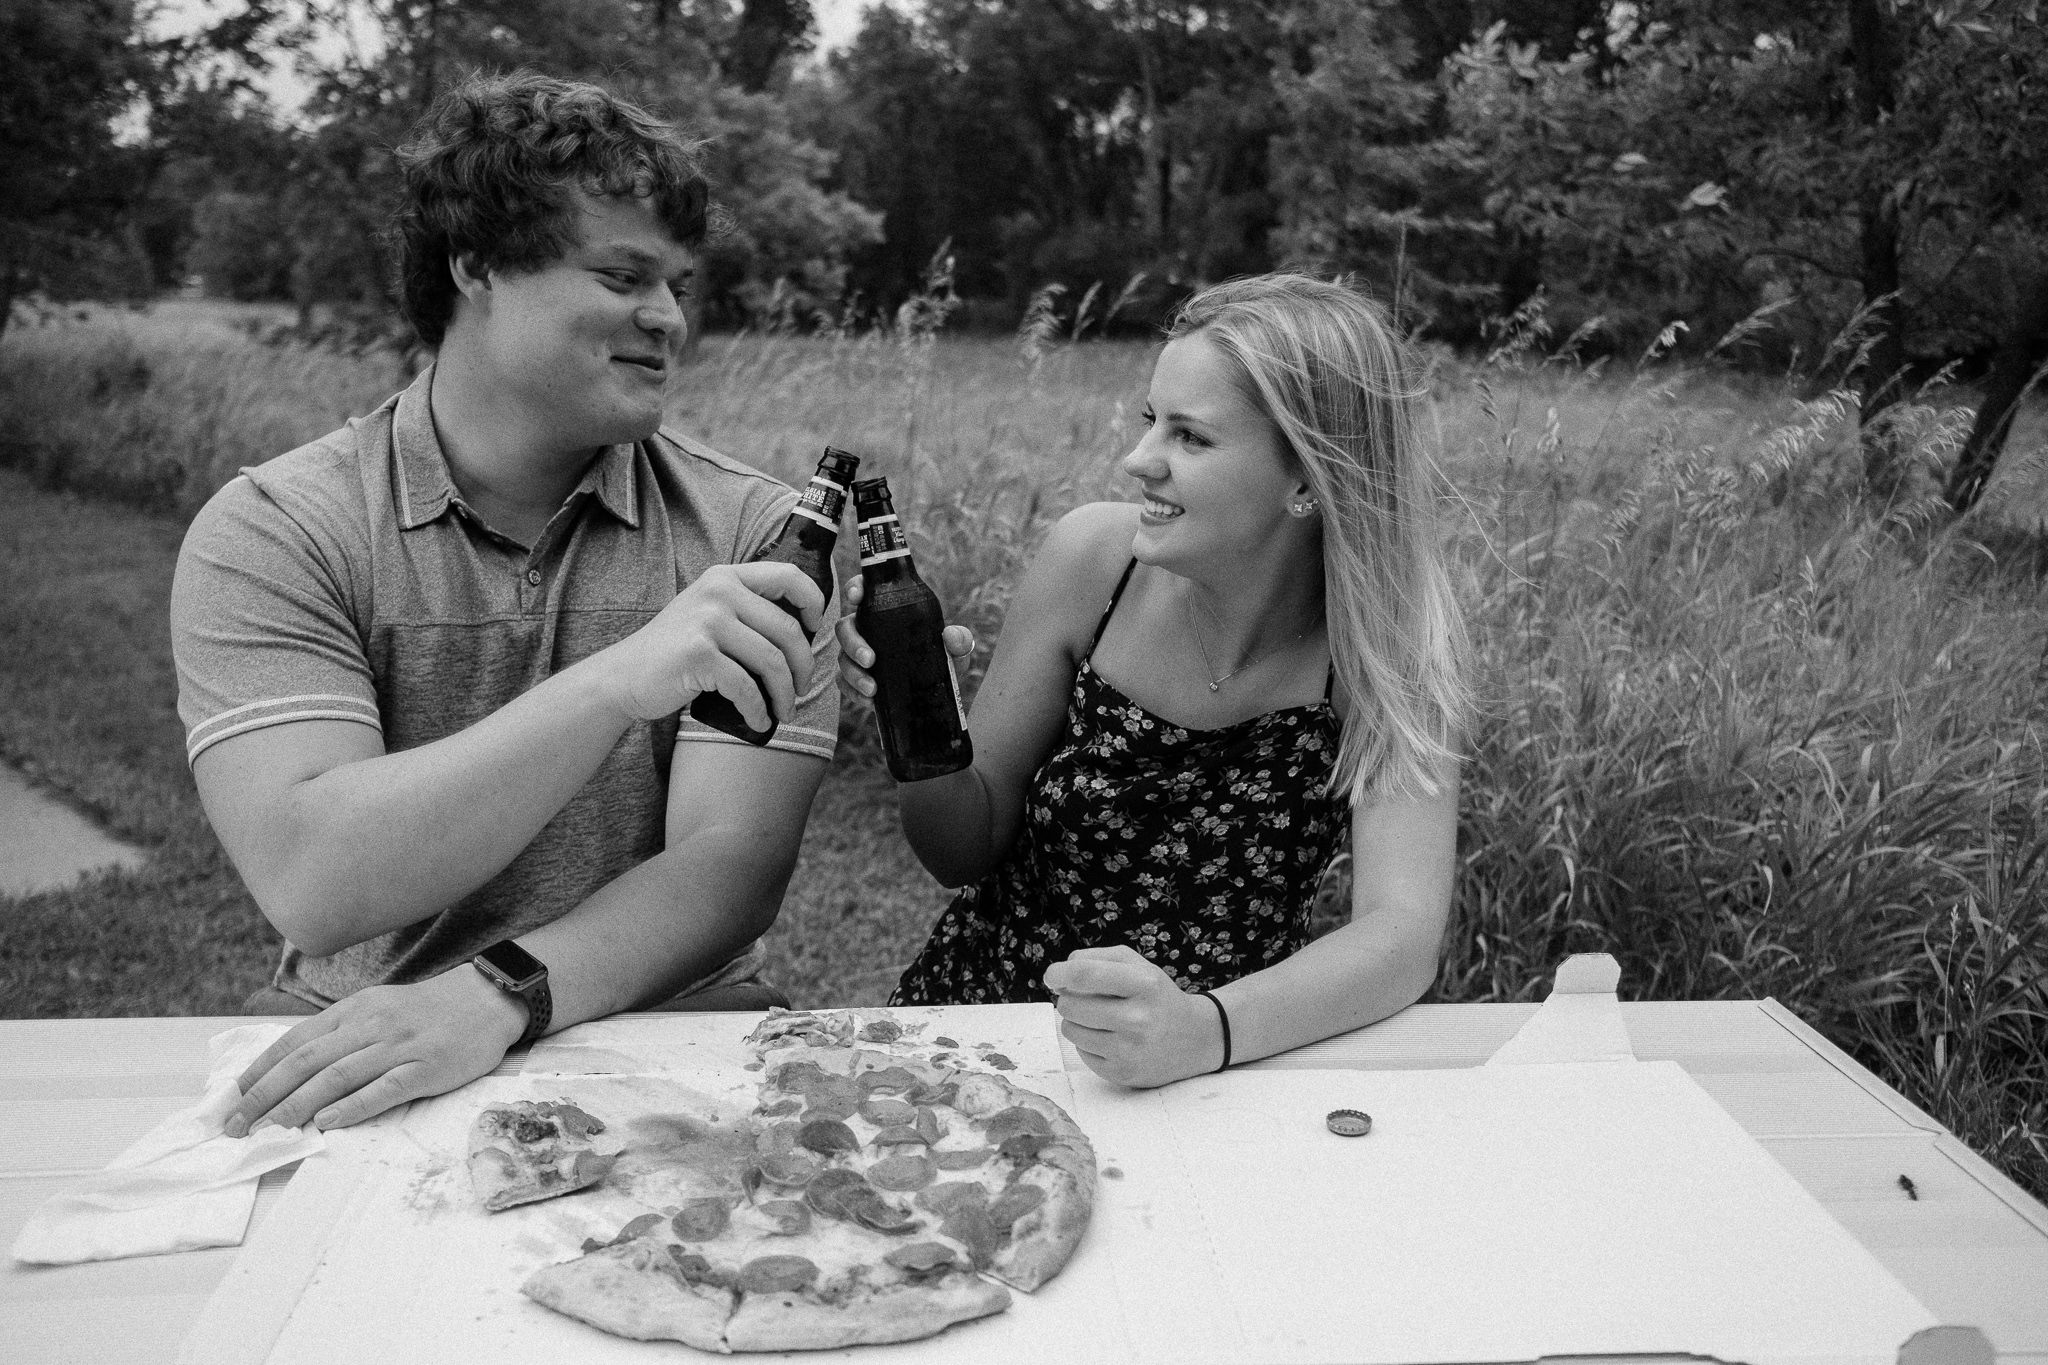 Couple clinking beer bottles at a picnic table while eating pizza.